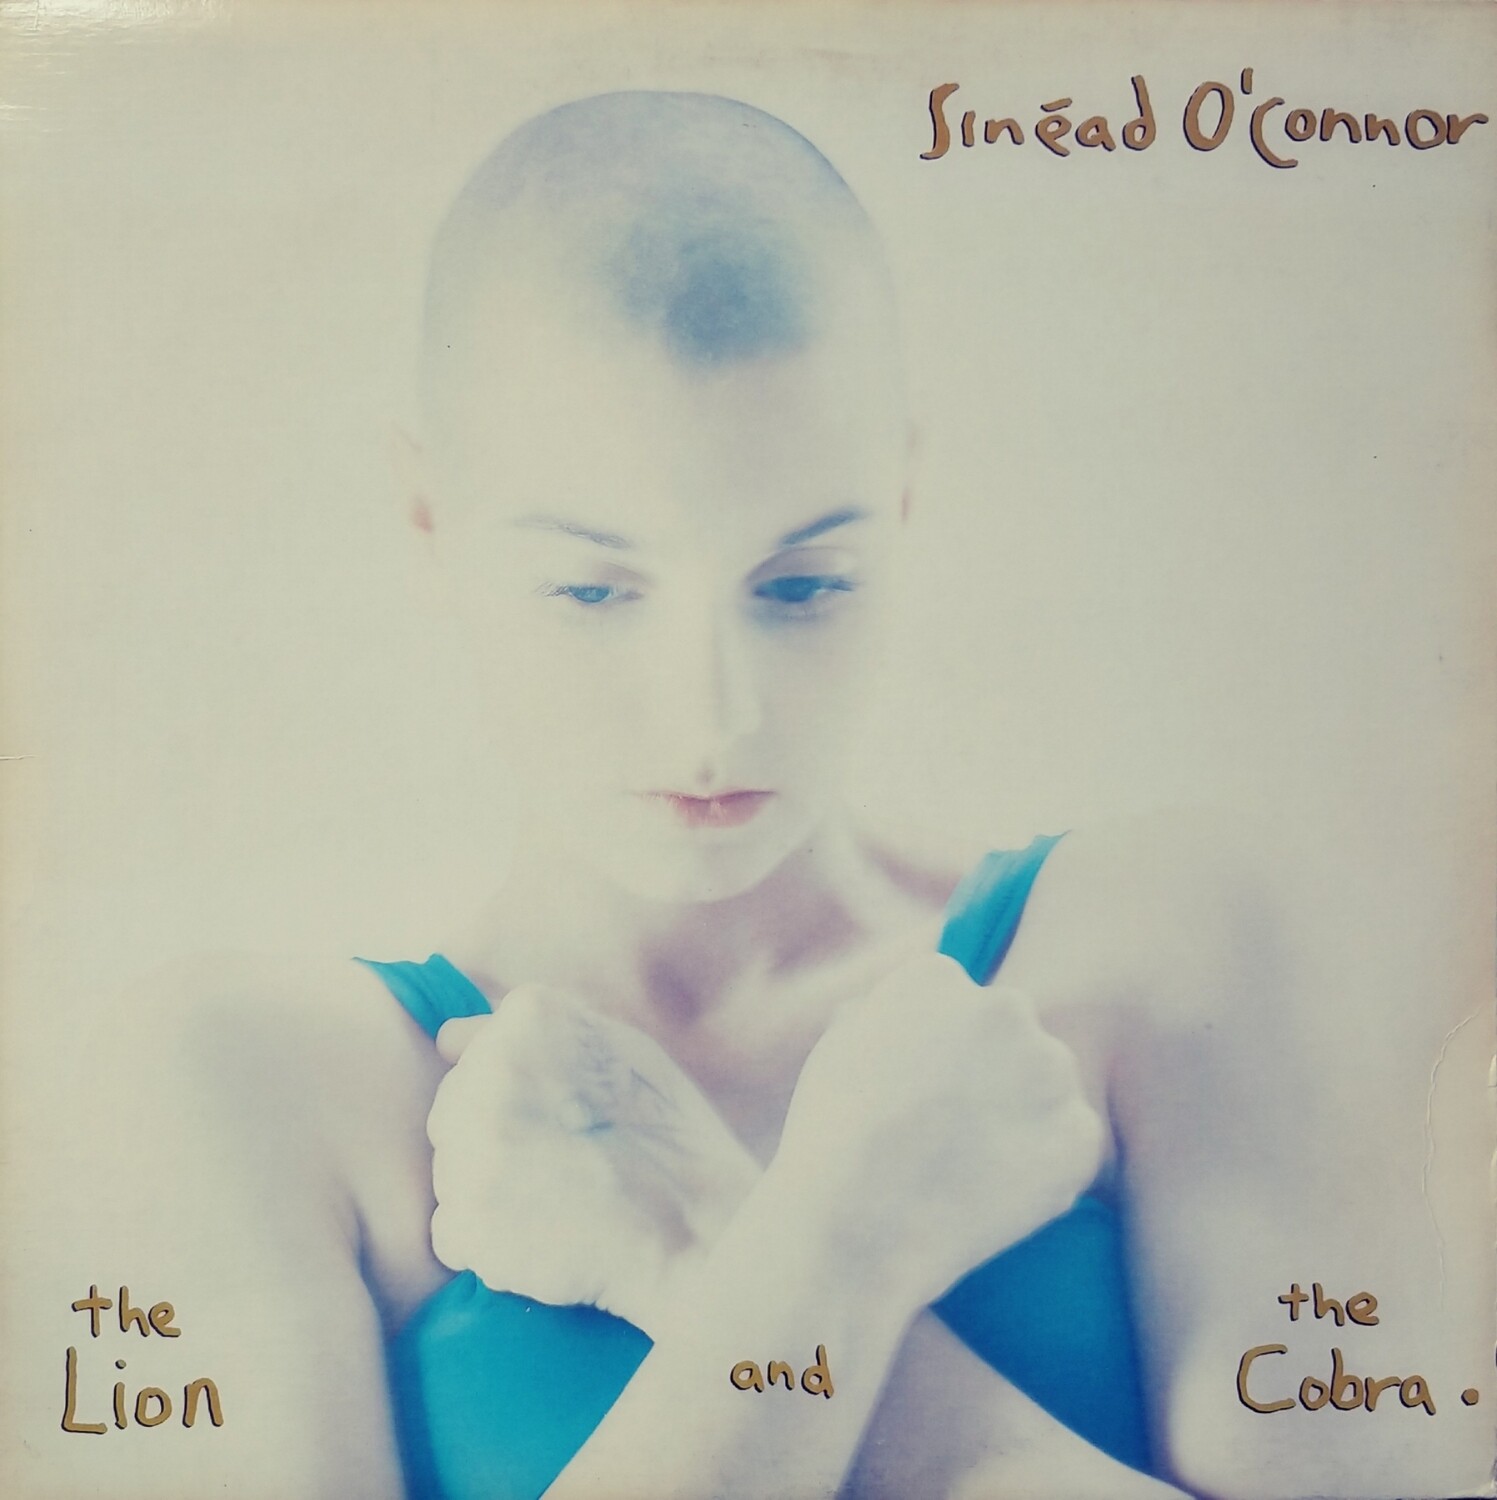 Sinead O'Connor - The lion and the cobra